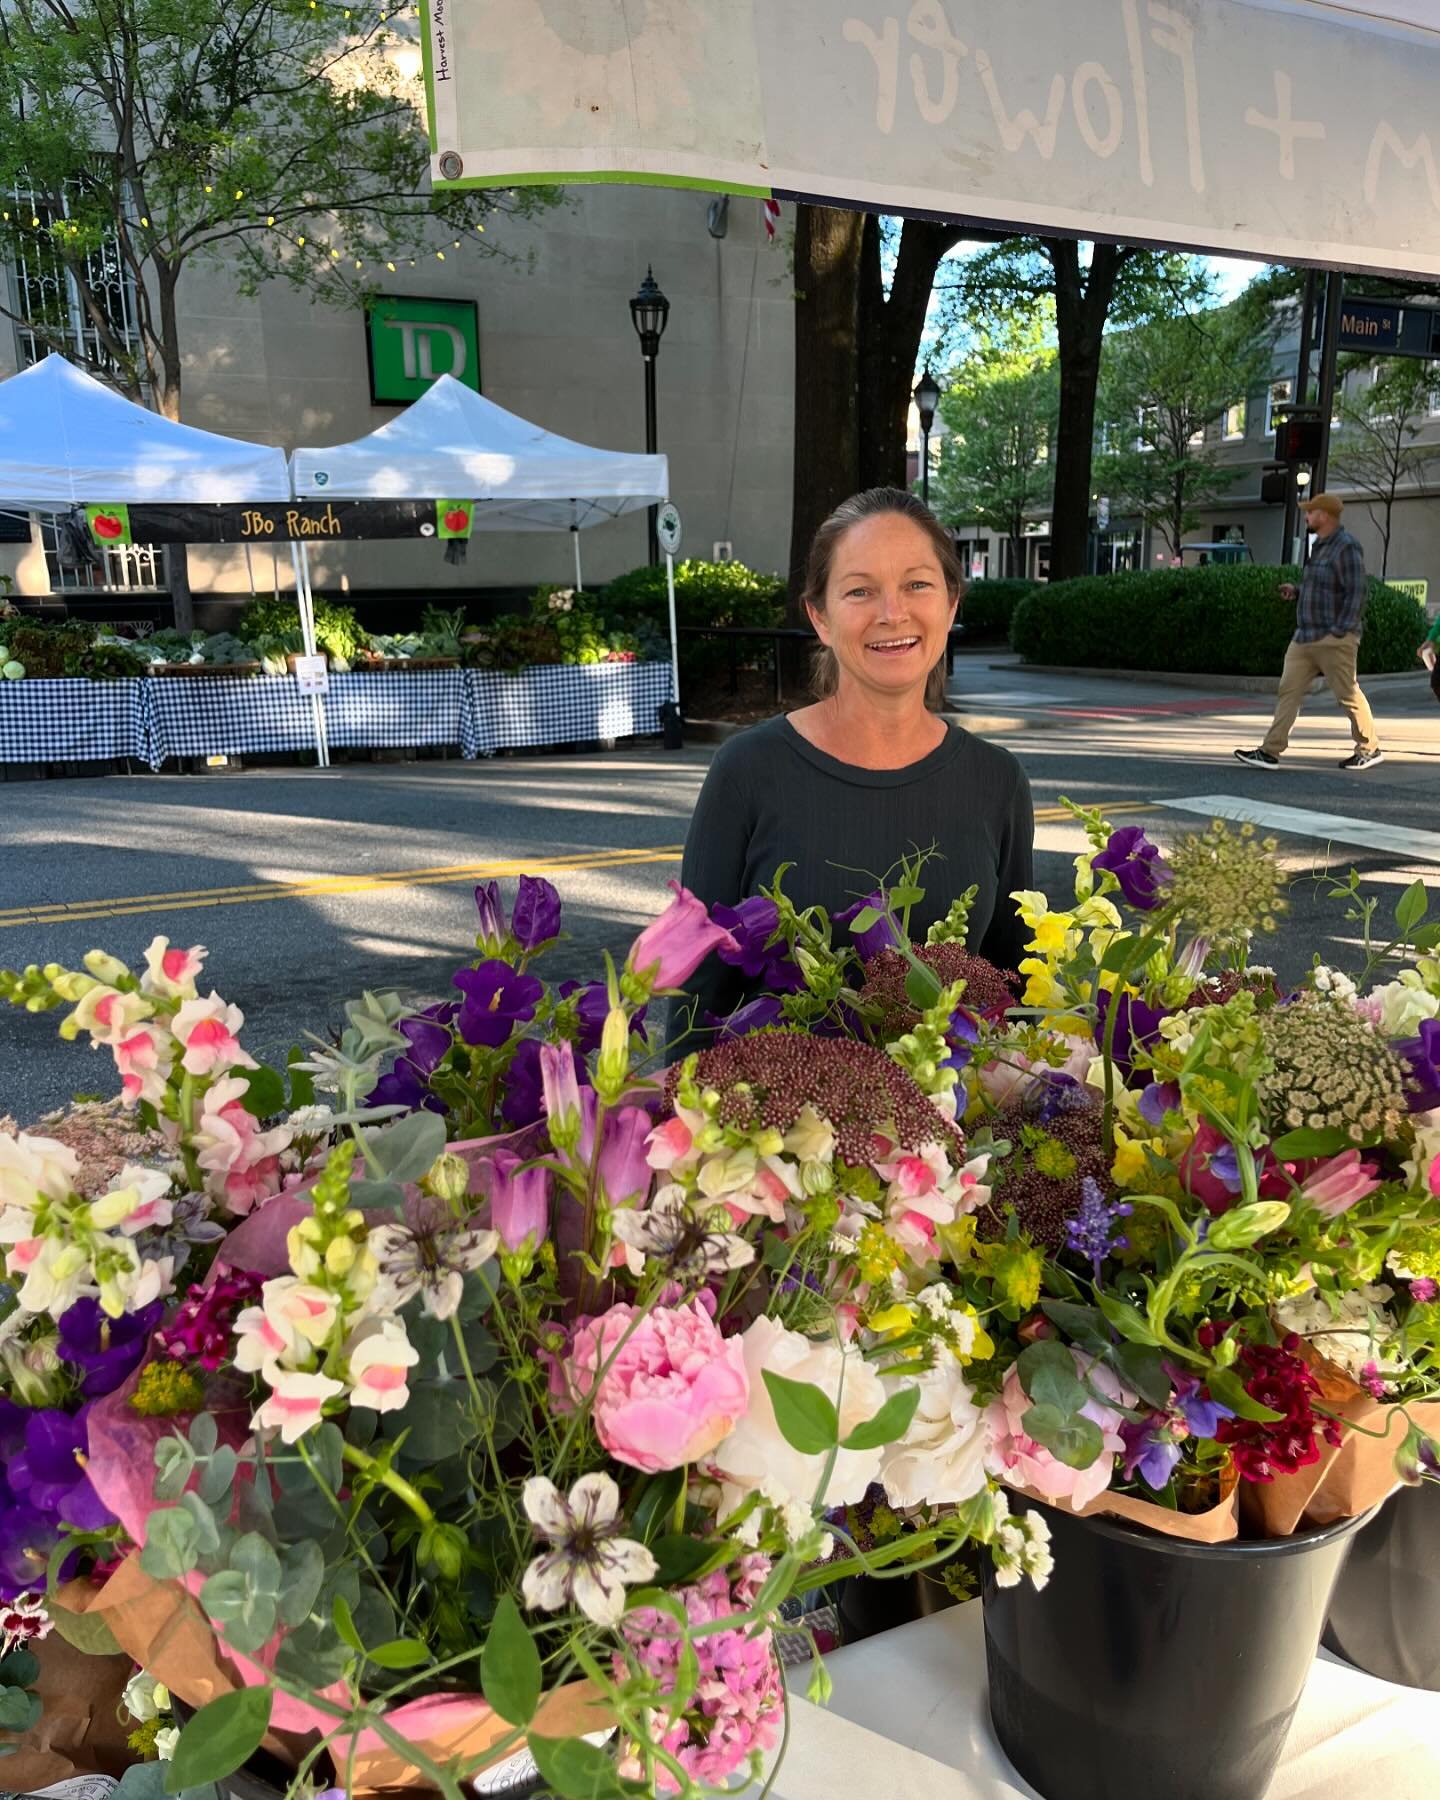 Happy Mother&rsquo;s Day! We bought locally grown flowers from a bunch of moms this weekend because it just felt right and they&rsquo;re better. And we still got some! For now. See you for breakfast!